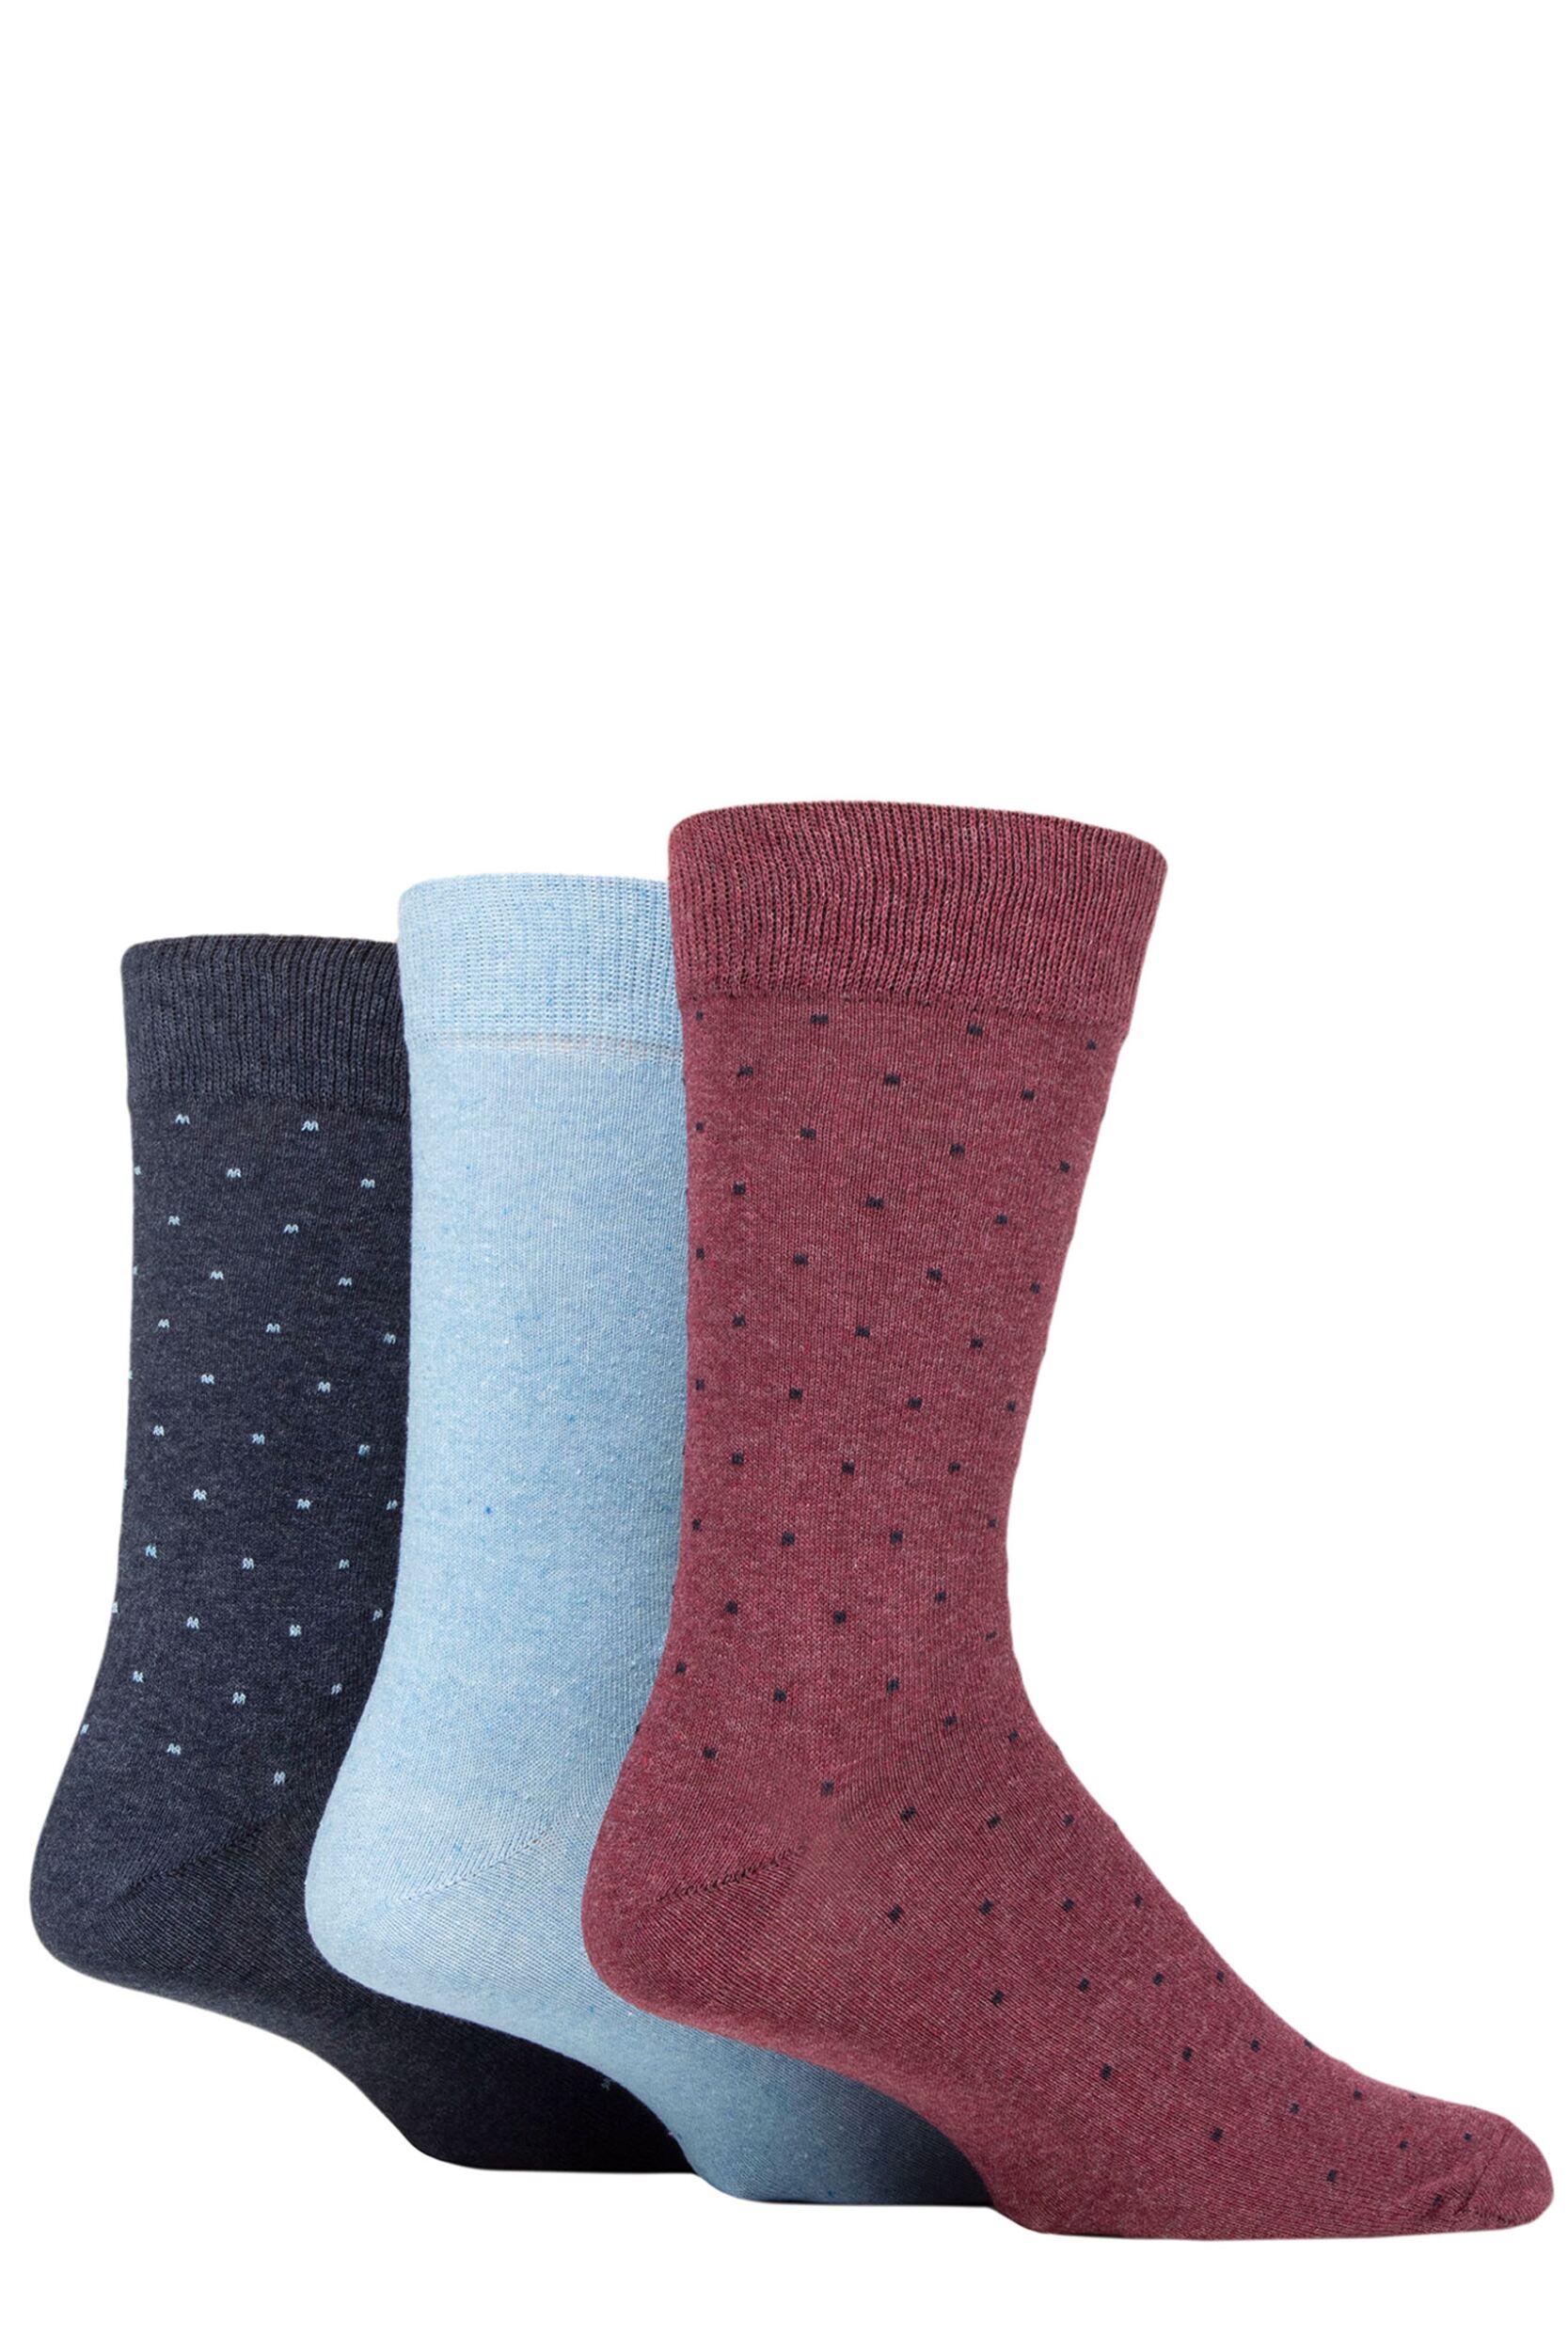 Mens 3 Pair SOCKSHOP TORE 100% Recycled Dots Cotton Socks Assorted 7-11 Mens